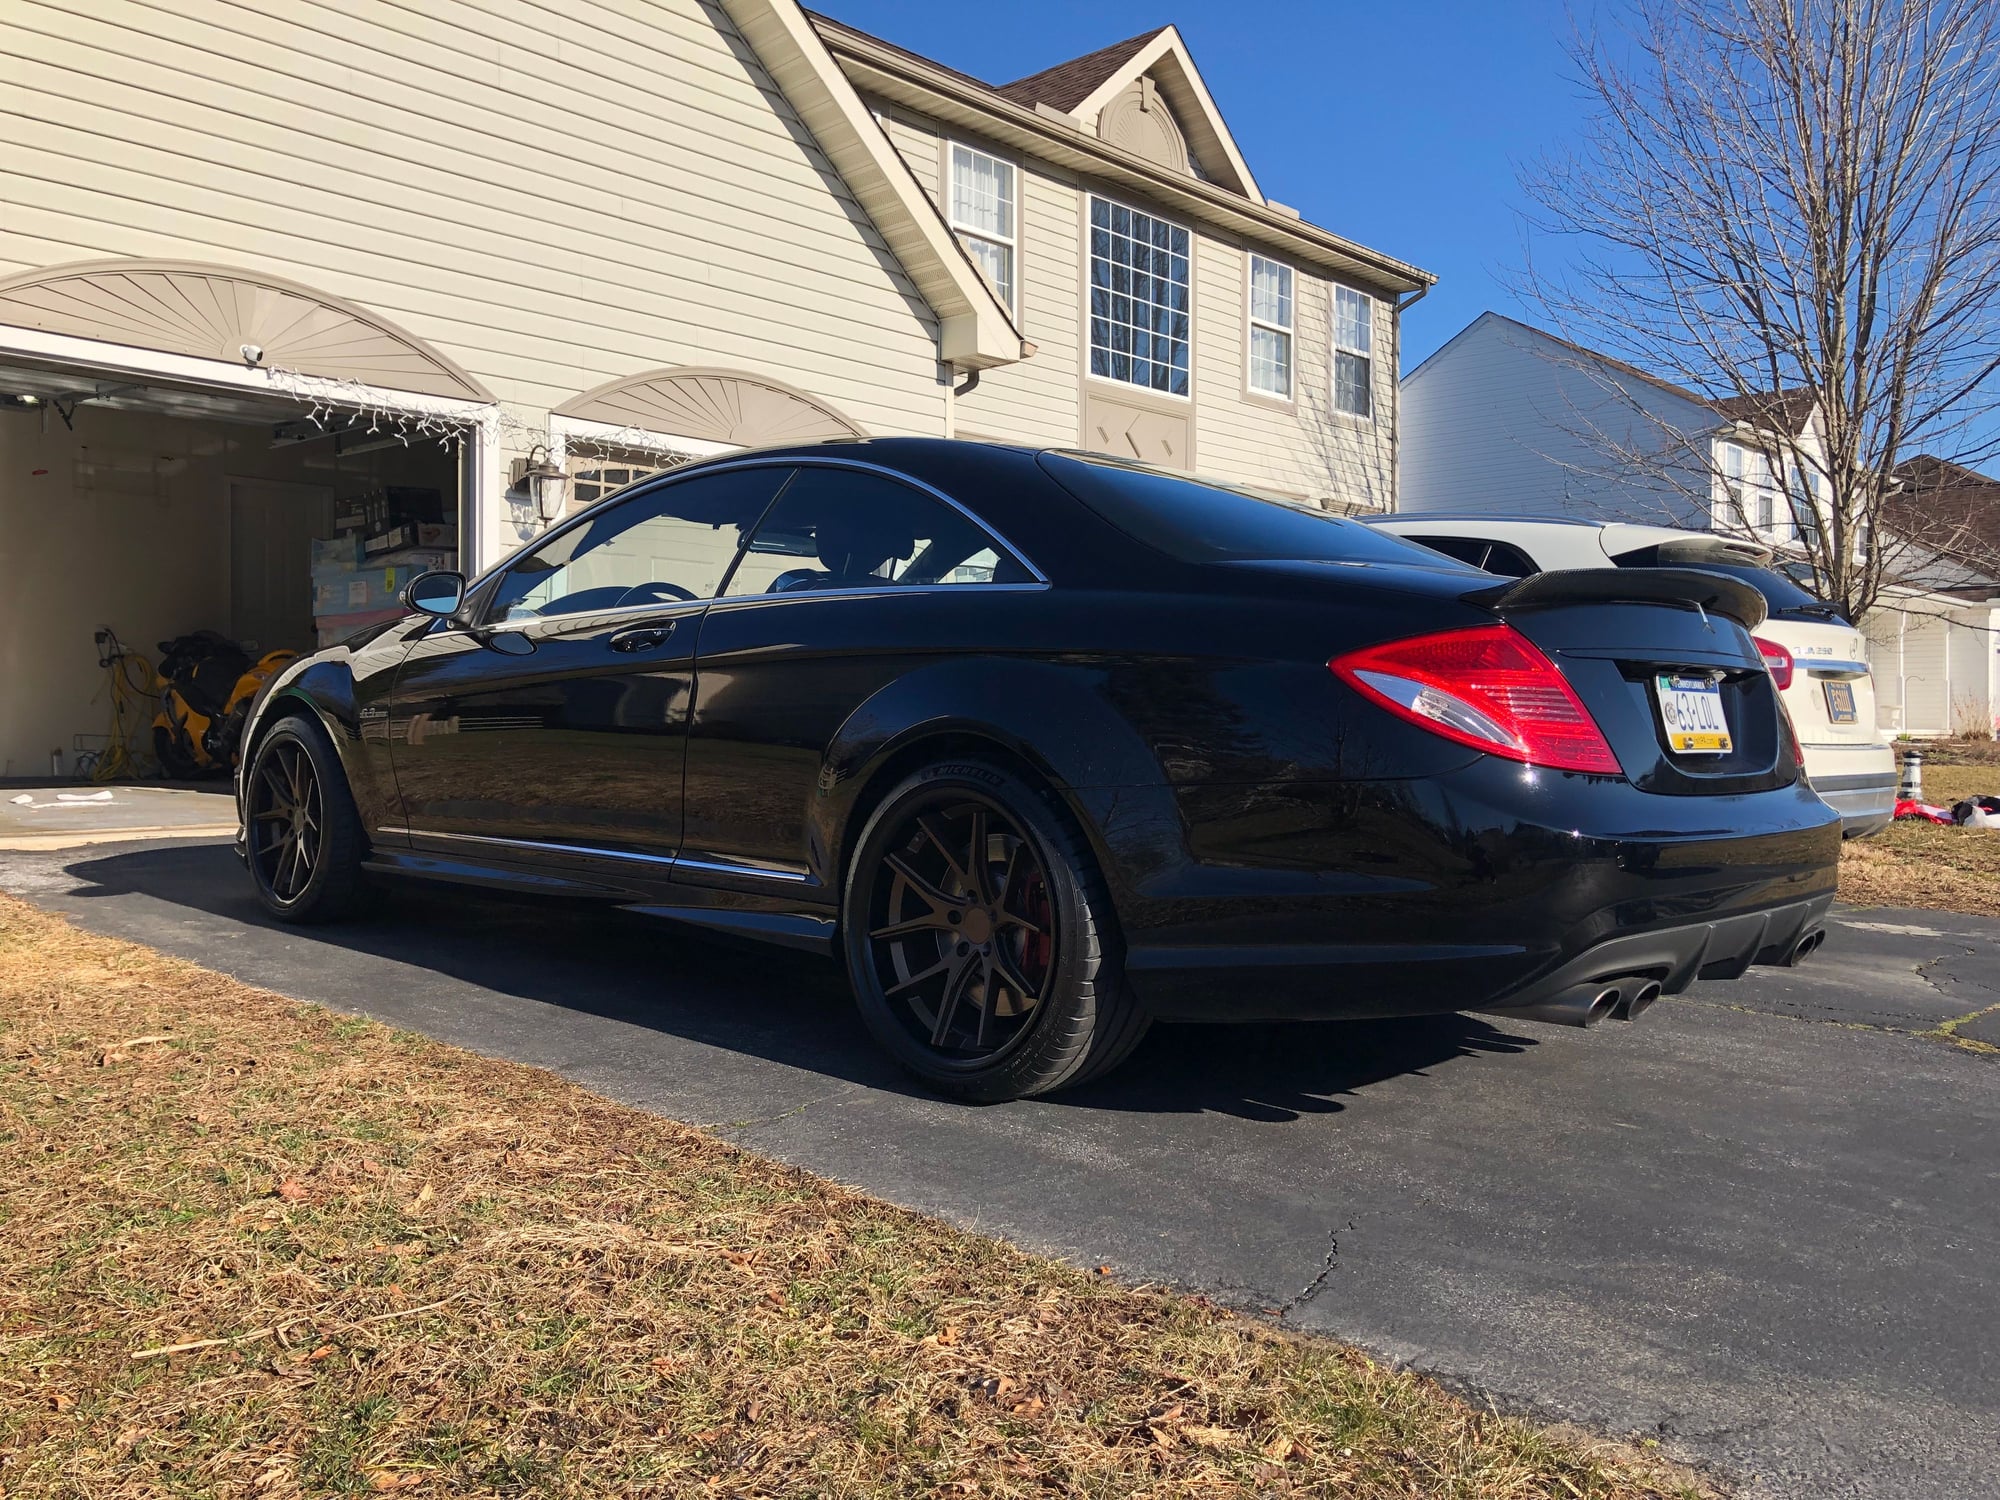 2008 Mercedes-Benz CL63 AMG - 2008 CL63 AMG for sale - Used - VIN Wddej77x38a015490 - 77,000 Miles - 8 cyl - 2WD - Automatic - Coupe - Black - Bear, DE 19701, United States